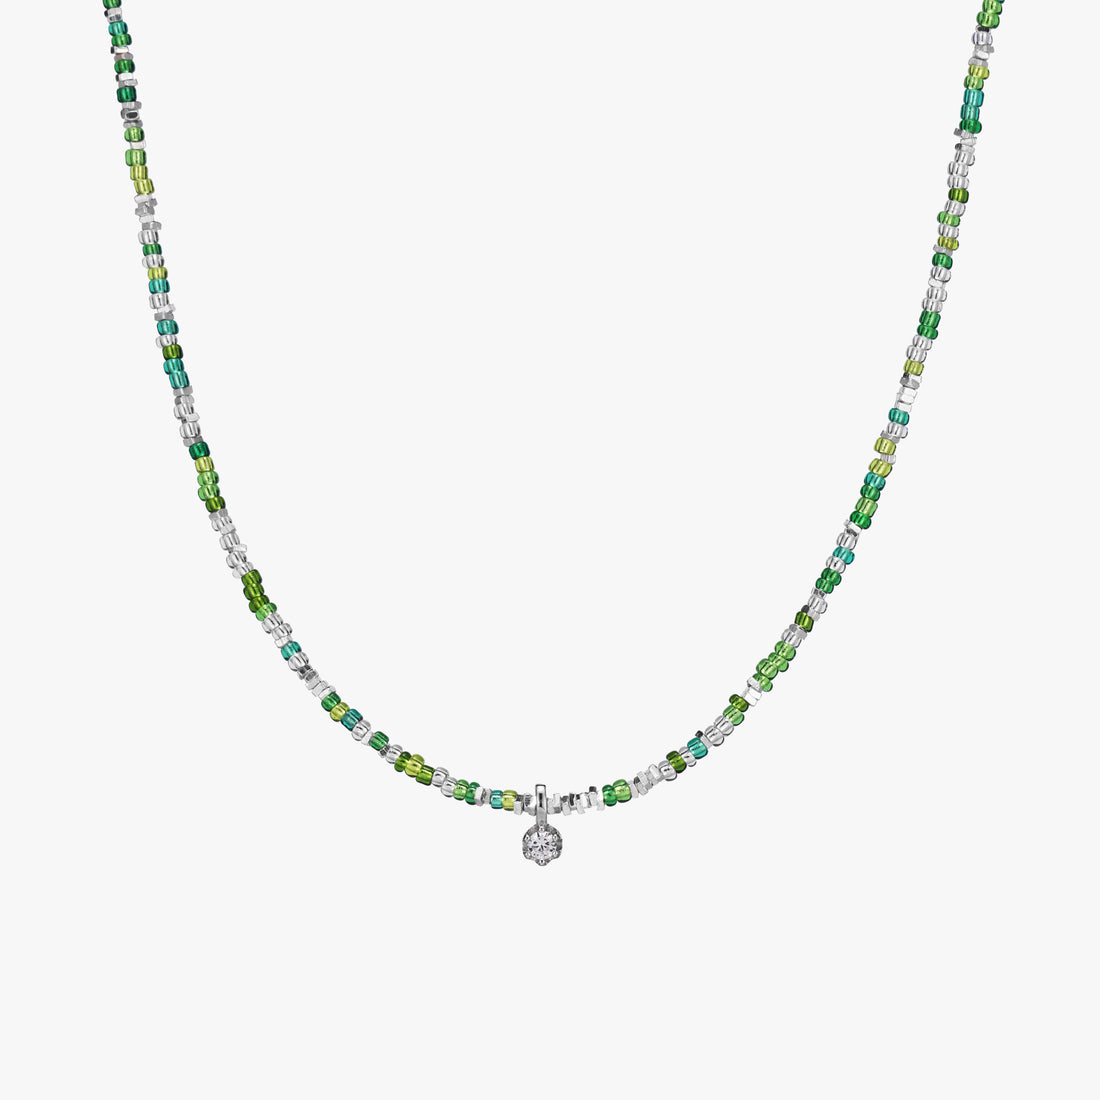 Green Gemstone S925 Beads Necklace